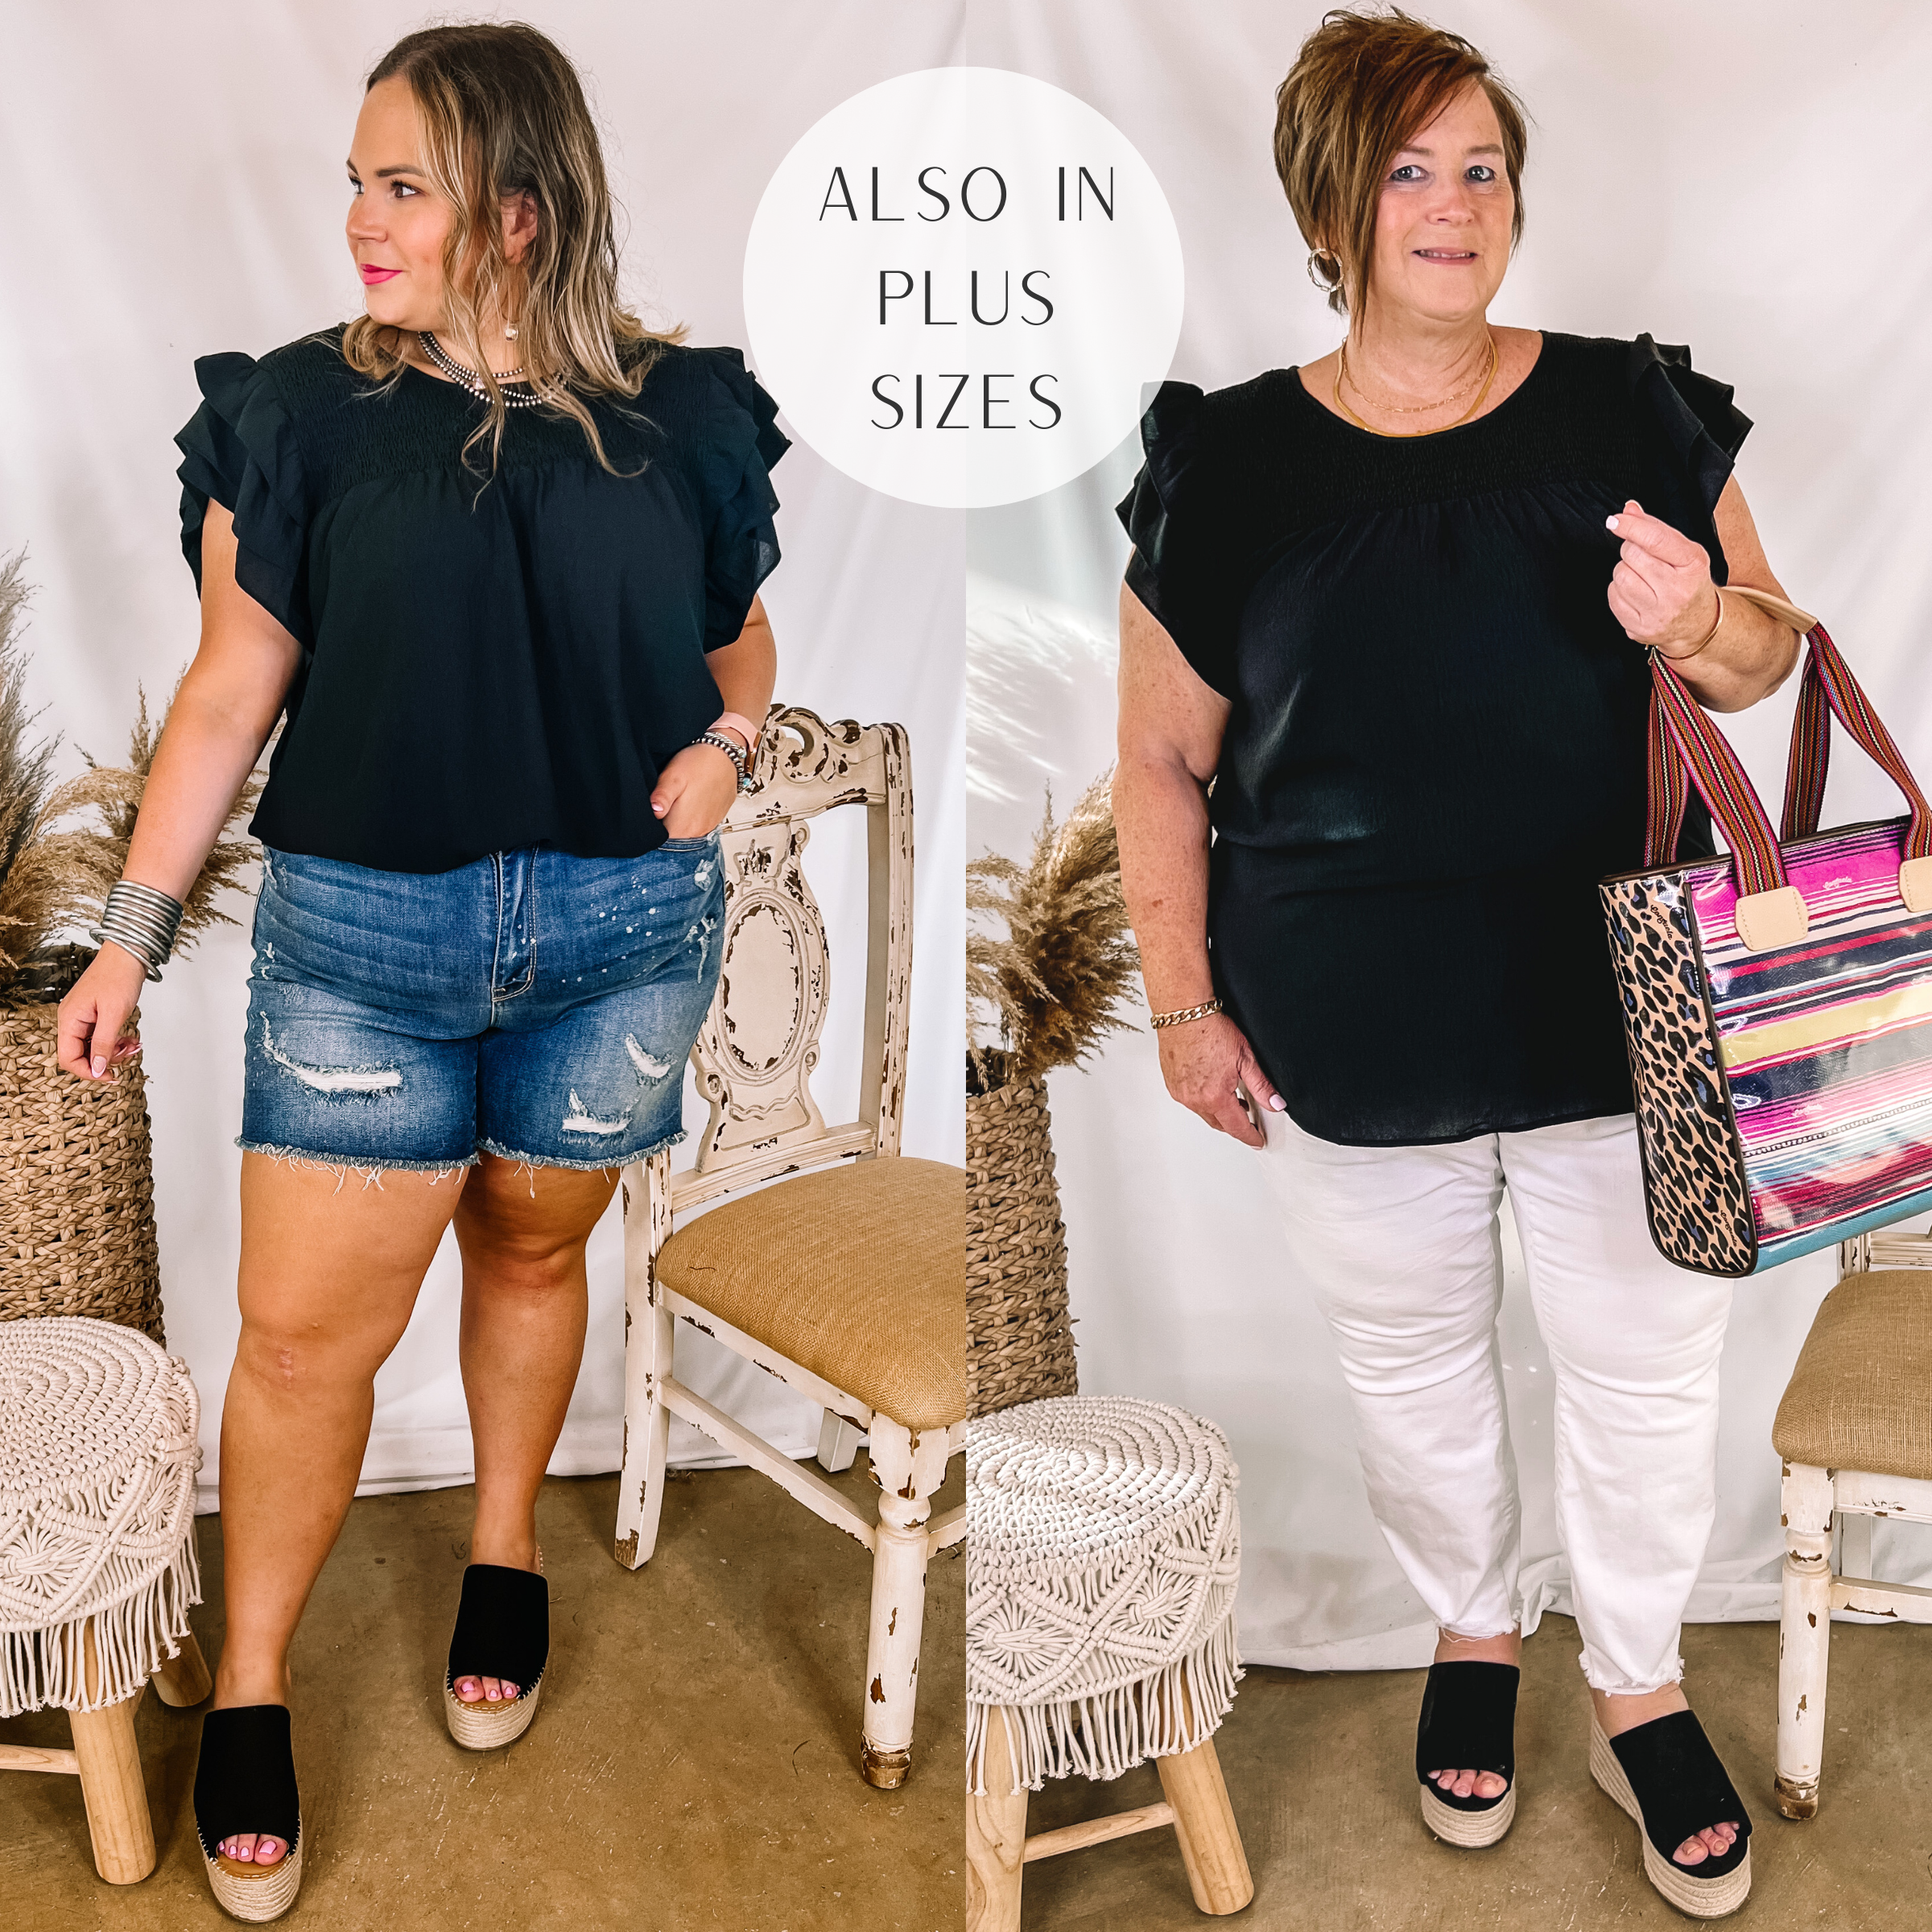 Models are wearing a black ruffle sleeve top that has a smocked upper. Size large model has it paired with distressed denim shorts, black wedges, and silver jewelry. Plus size model has it paired with white jeans, black wedges, and gold jewelry.